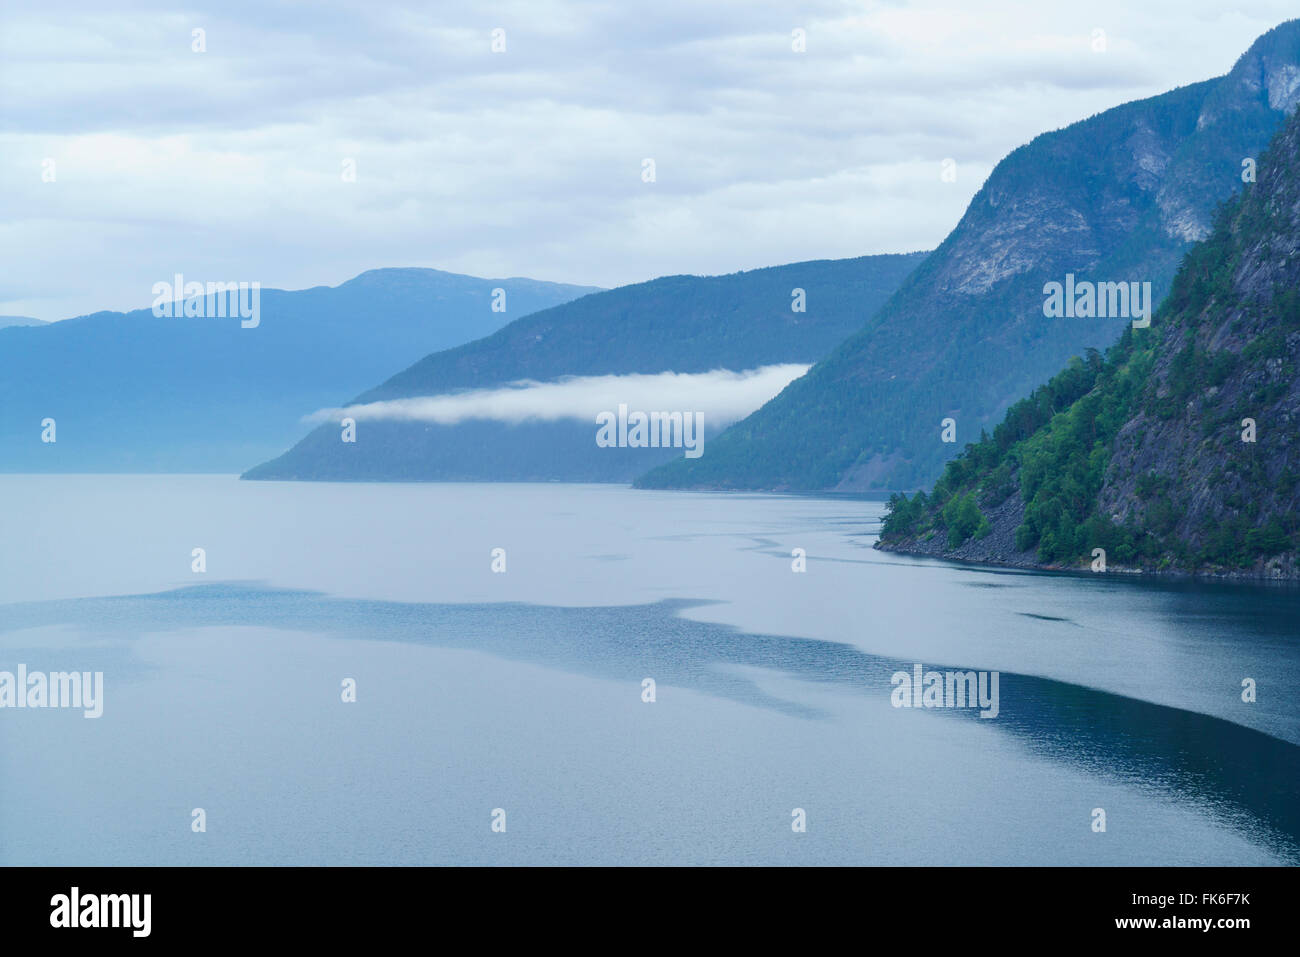 Aurlandsfjord, a branch of Sognefjord near the small town of Flam, Norway, Scandinavia, Europe Stock Photo